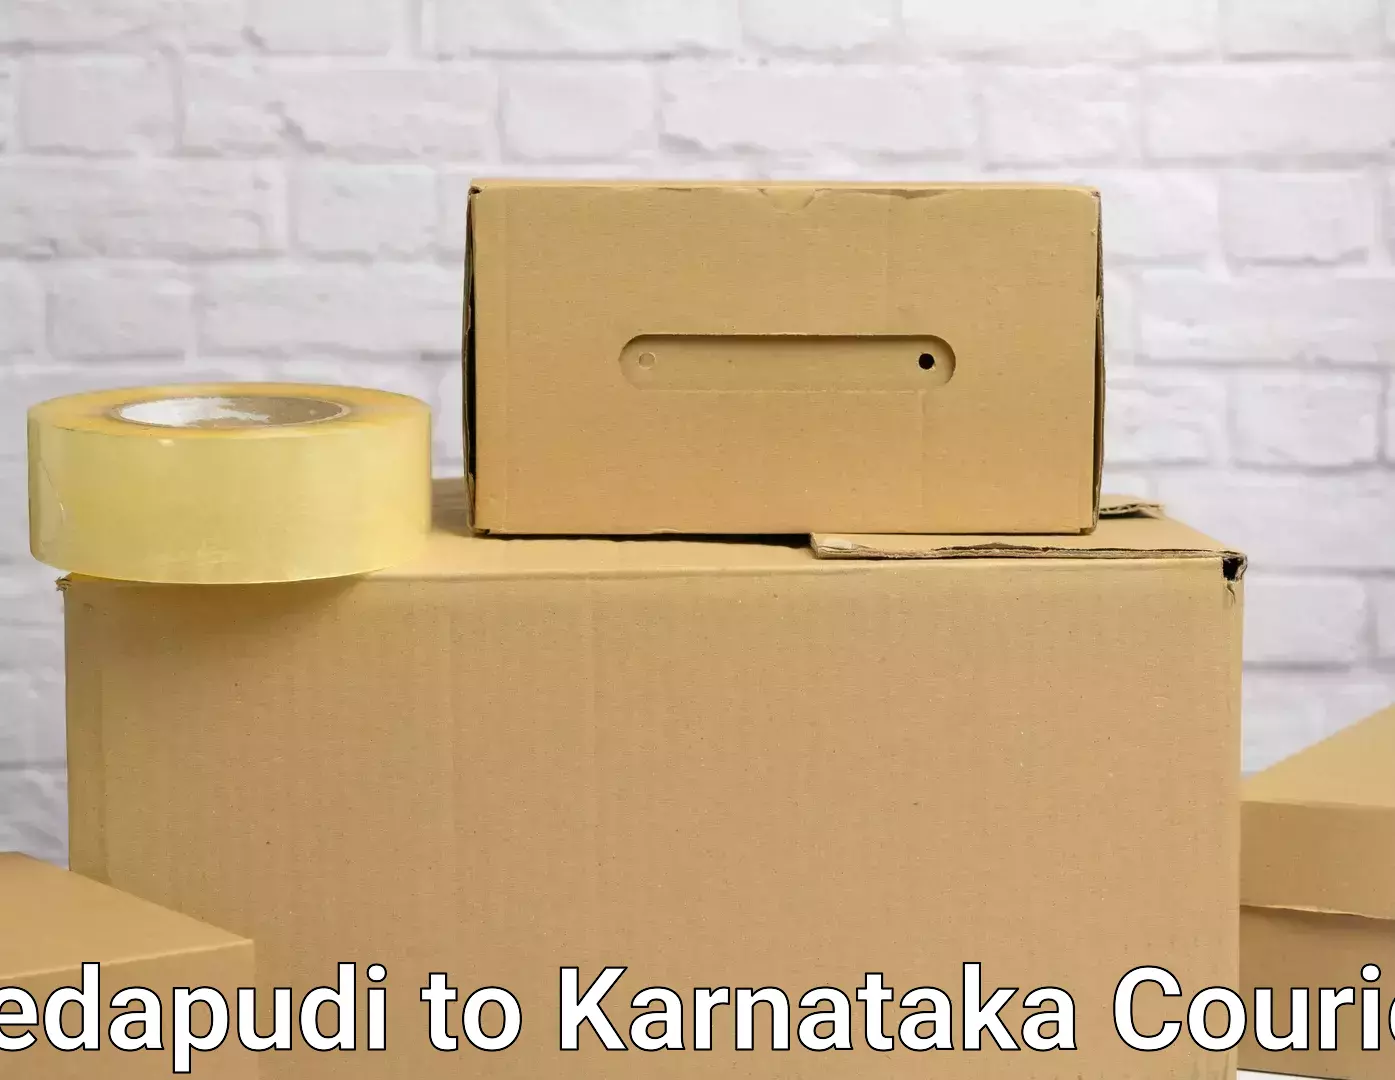 Hassle-free relocation Pedapudi to Ilkal